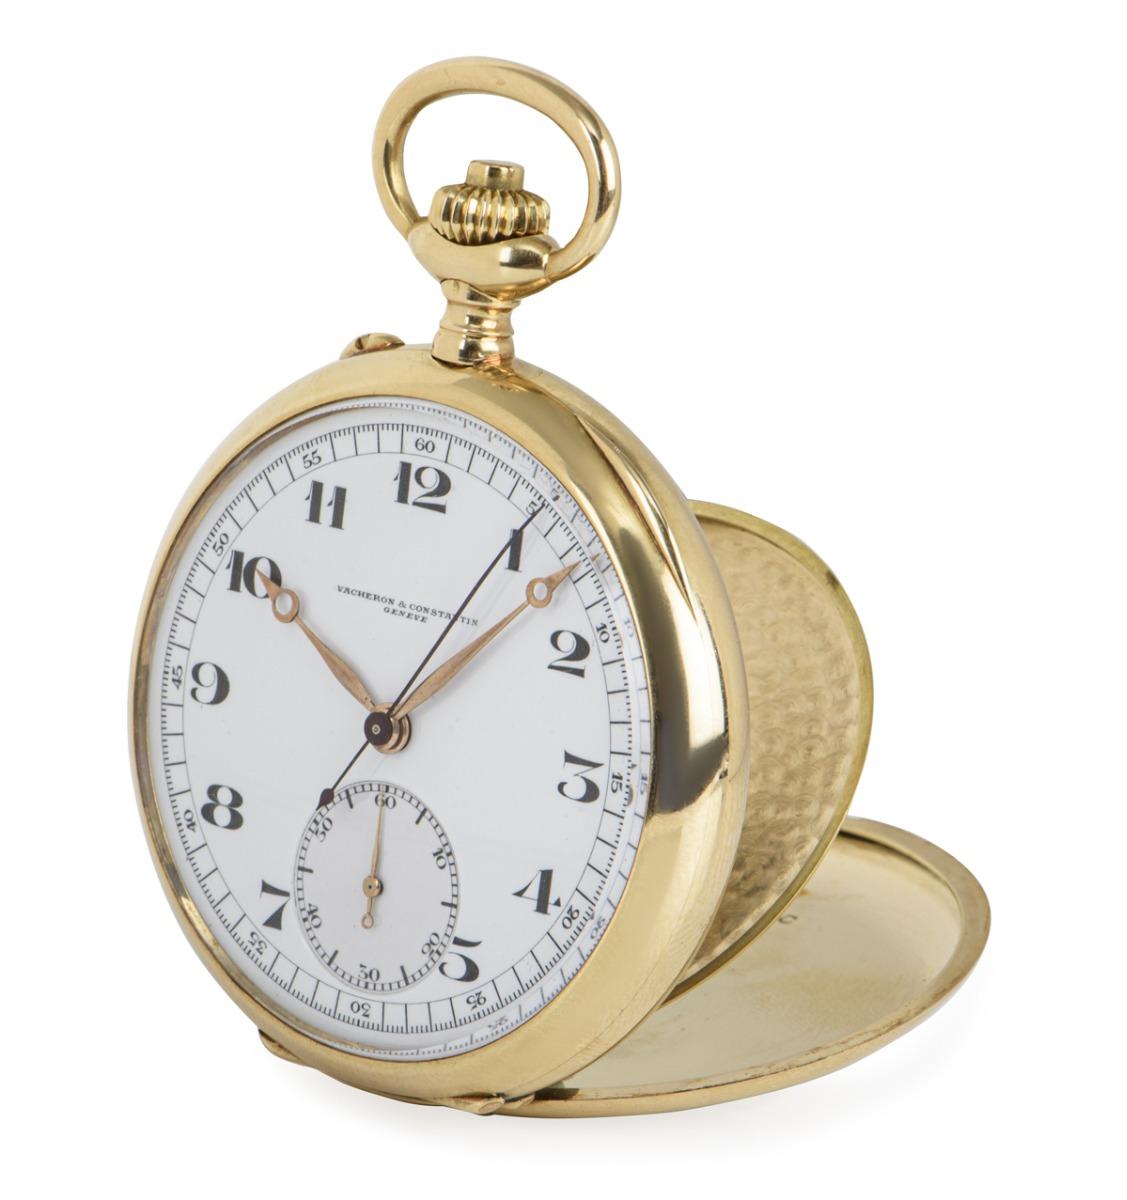 Vacheron & Constantin 18Kt Yellow Gold Open Face Chronograph Pocket watch with it's original box C1924.

The yellow gold case with monogram to the rear cover, Swiss hallmarked and signed V&C case with the inner cover signed and dated 1st April